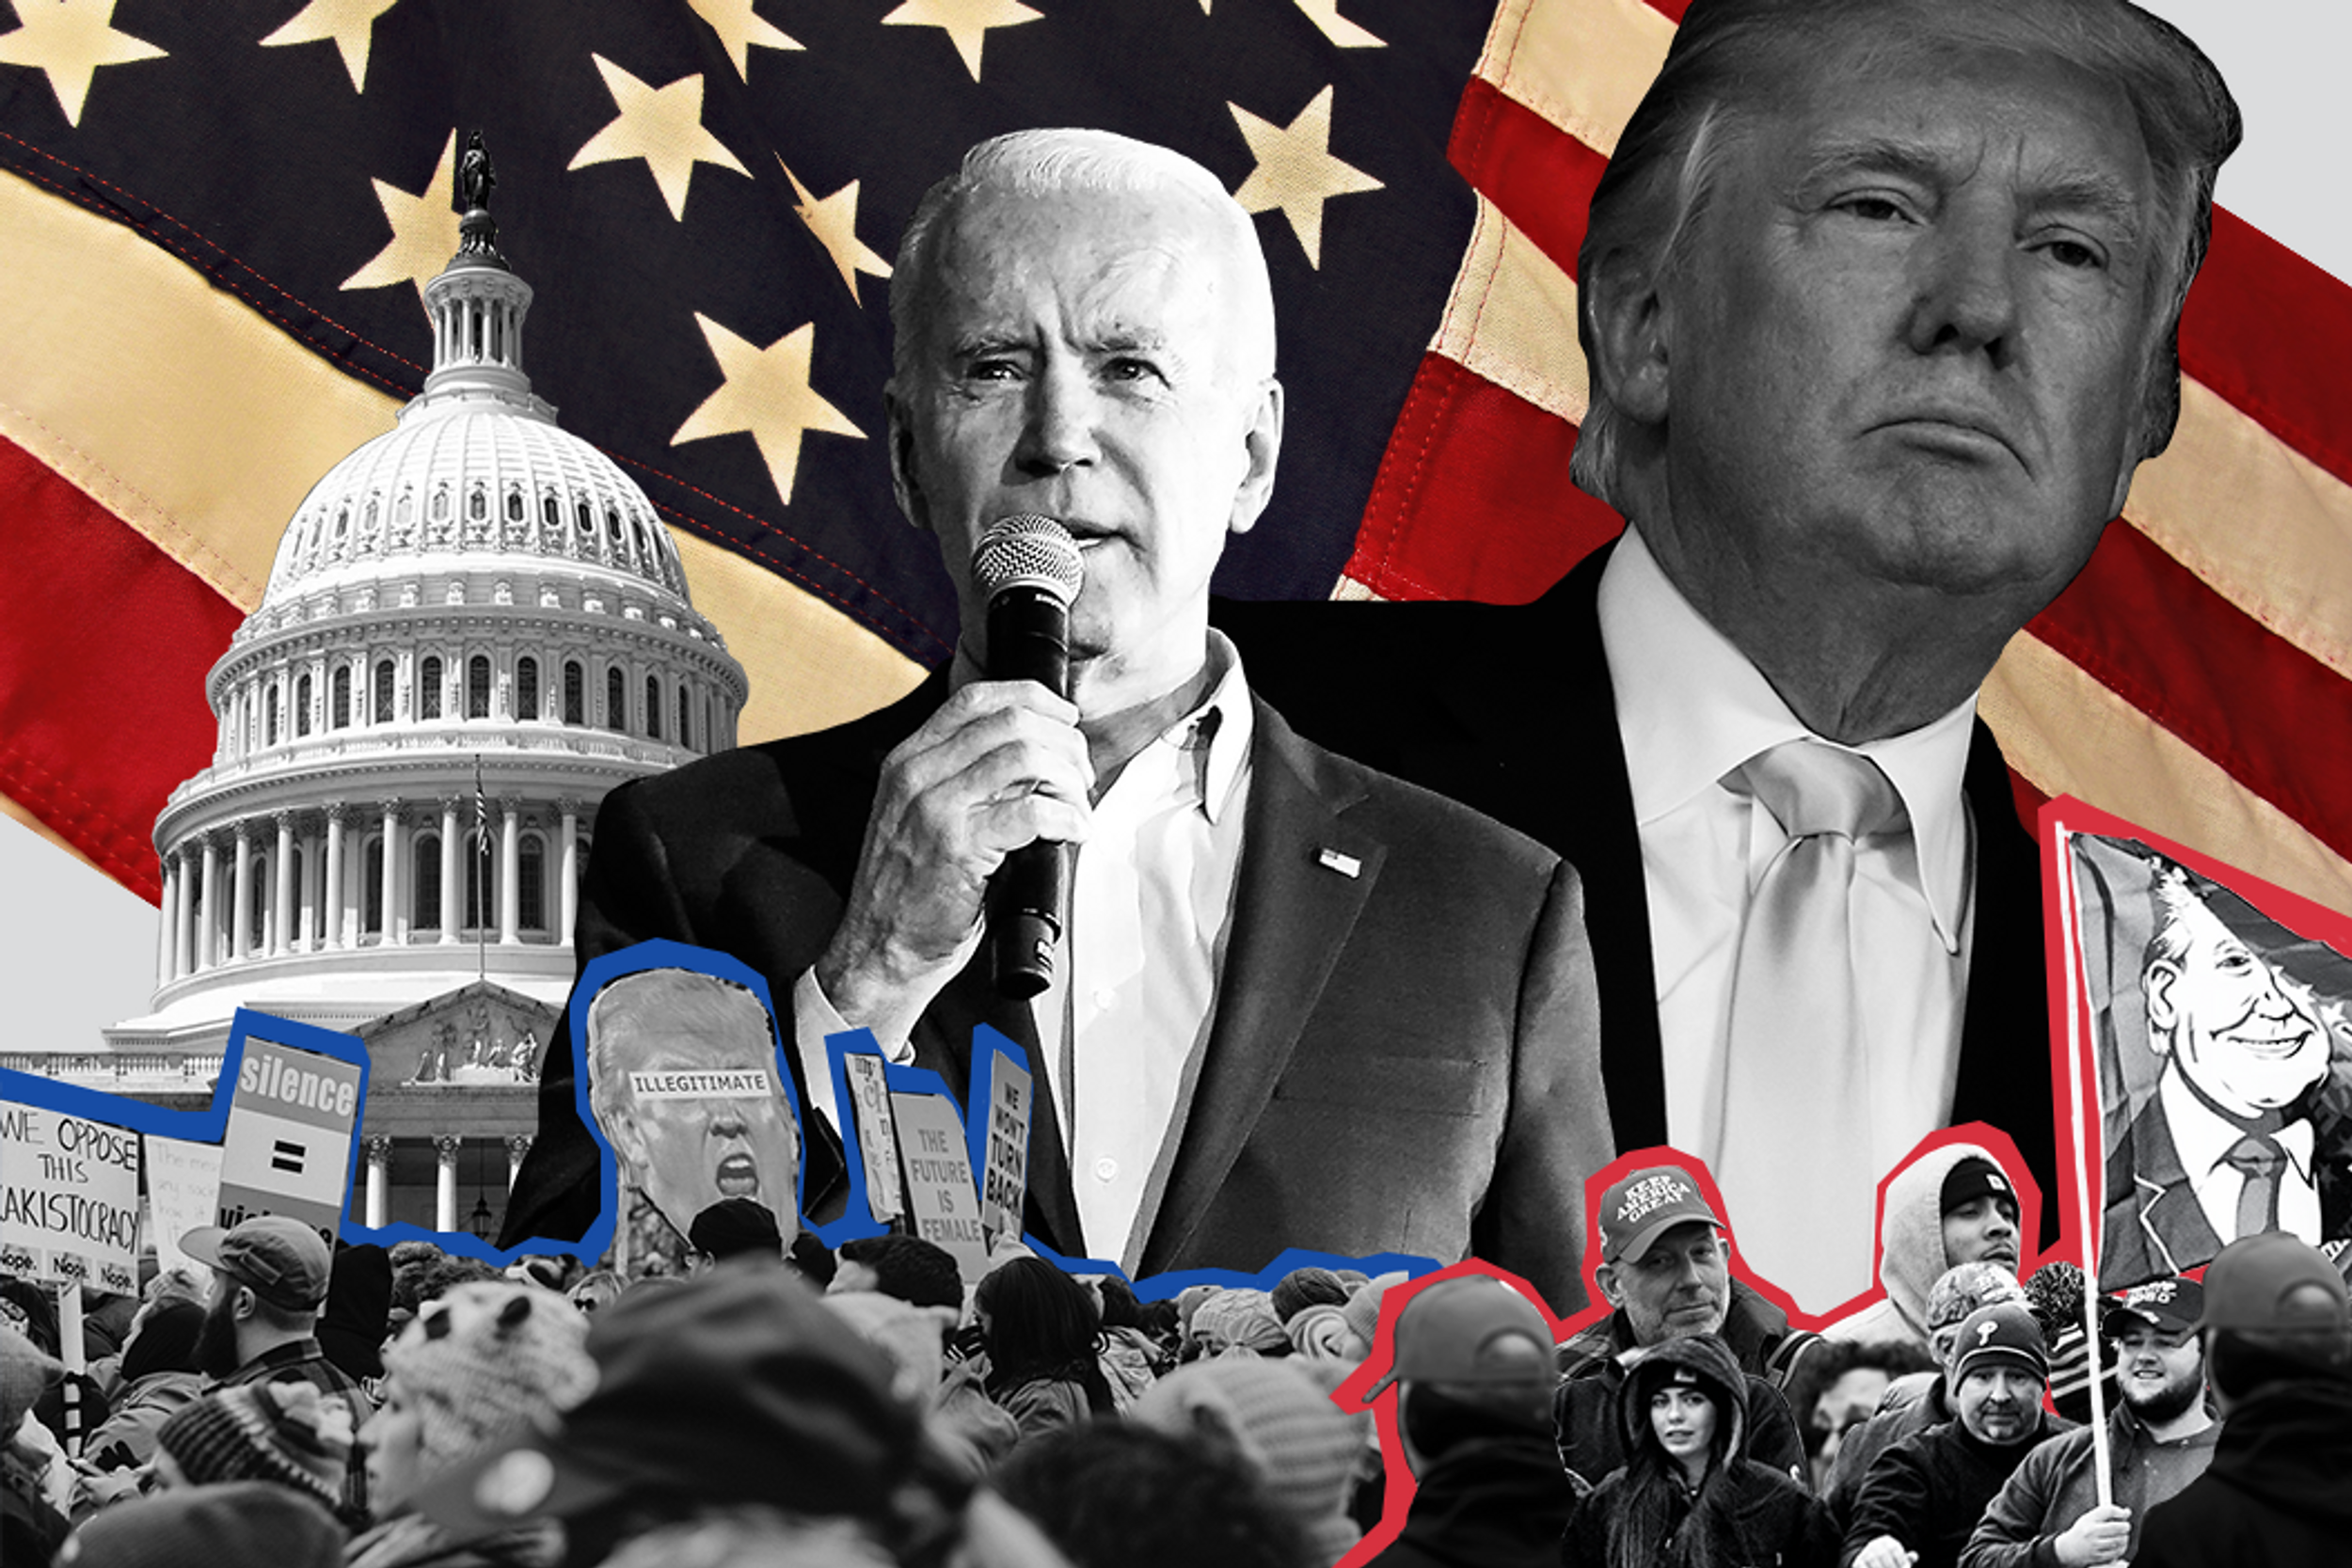 President Trump and Joe Biden will face off in the first US presidential debate on September 29. Art by Annie Gugliotta